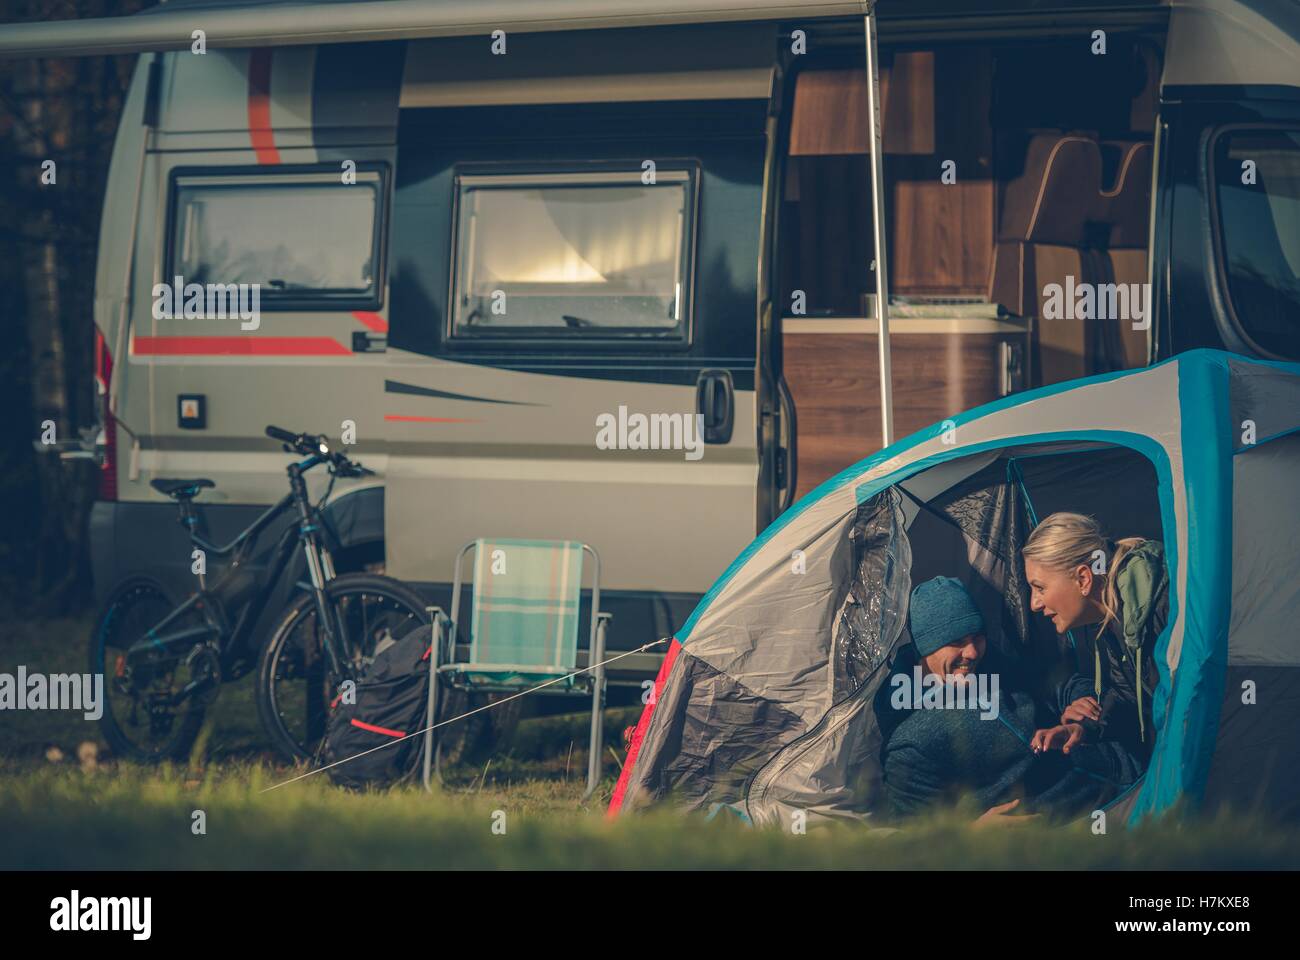 Romantic Couples Tent Camping. Young Caucasian Couples Having Fun Inside Their Tent on the Campground. Stock Photo